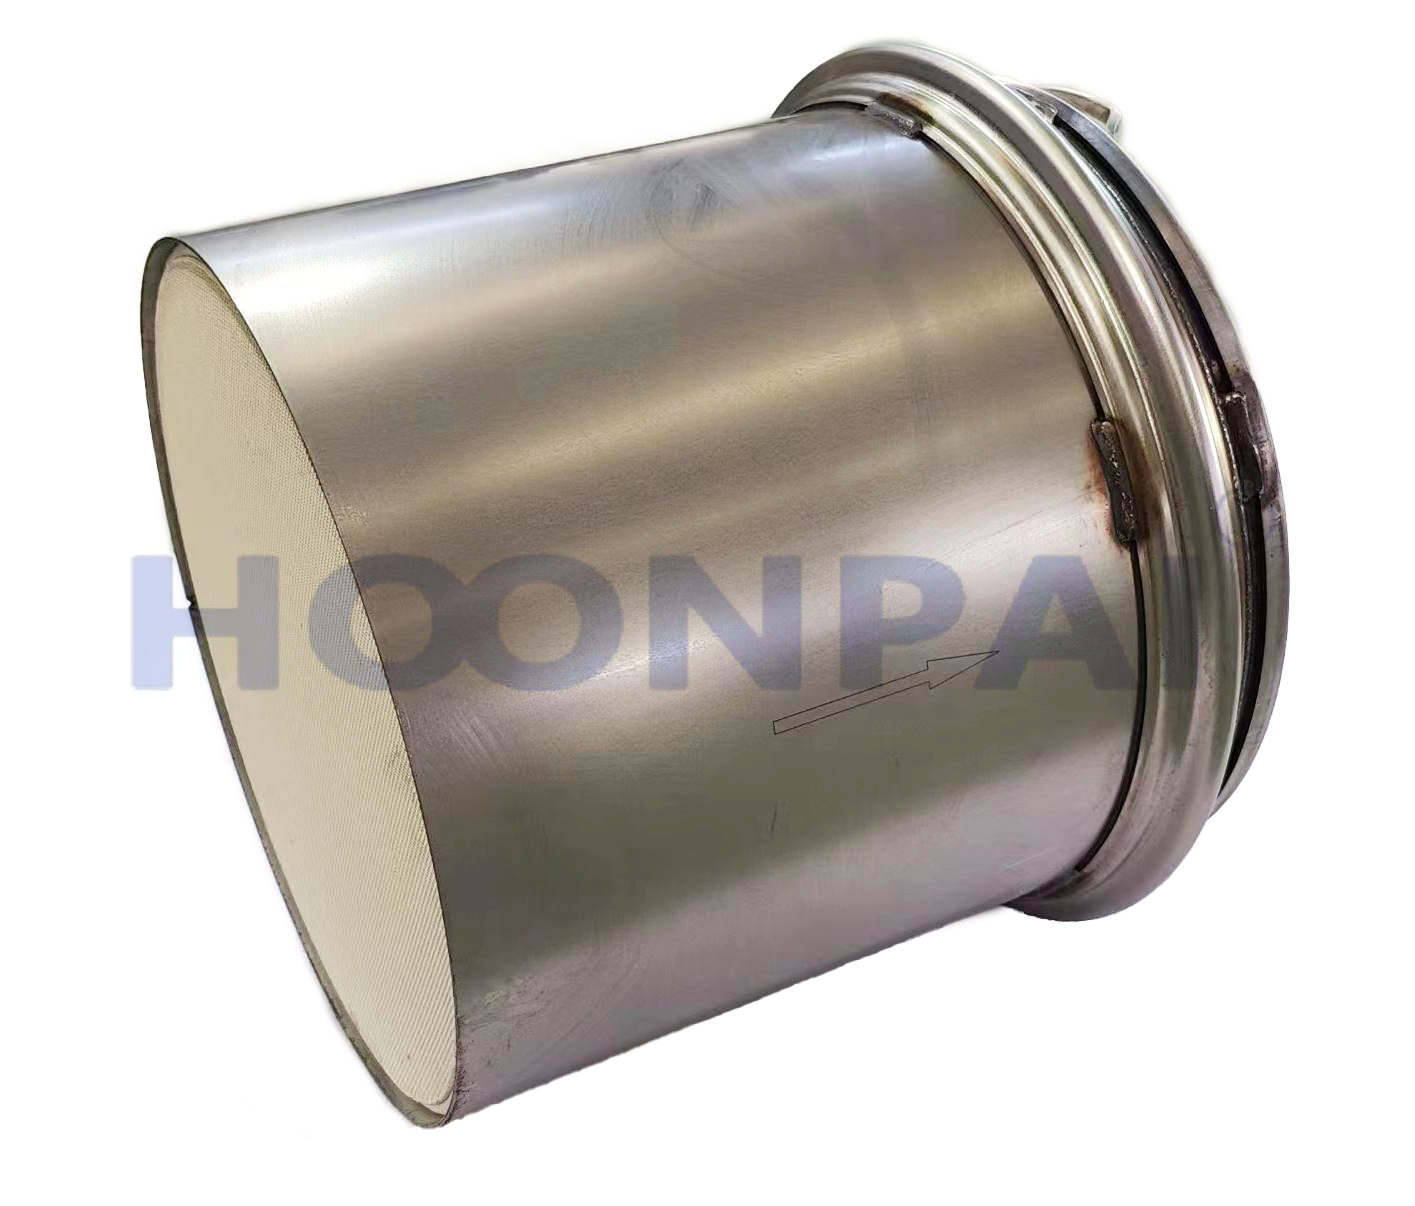 EURO6 DPF Ceramic Catalytic Converter and Diesel Particulate Filter for IVECO Truck Parts OEM:5802372494